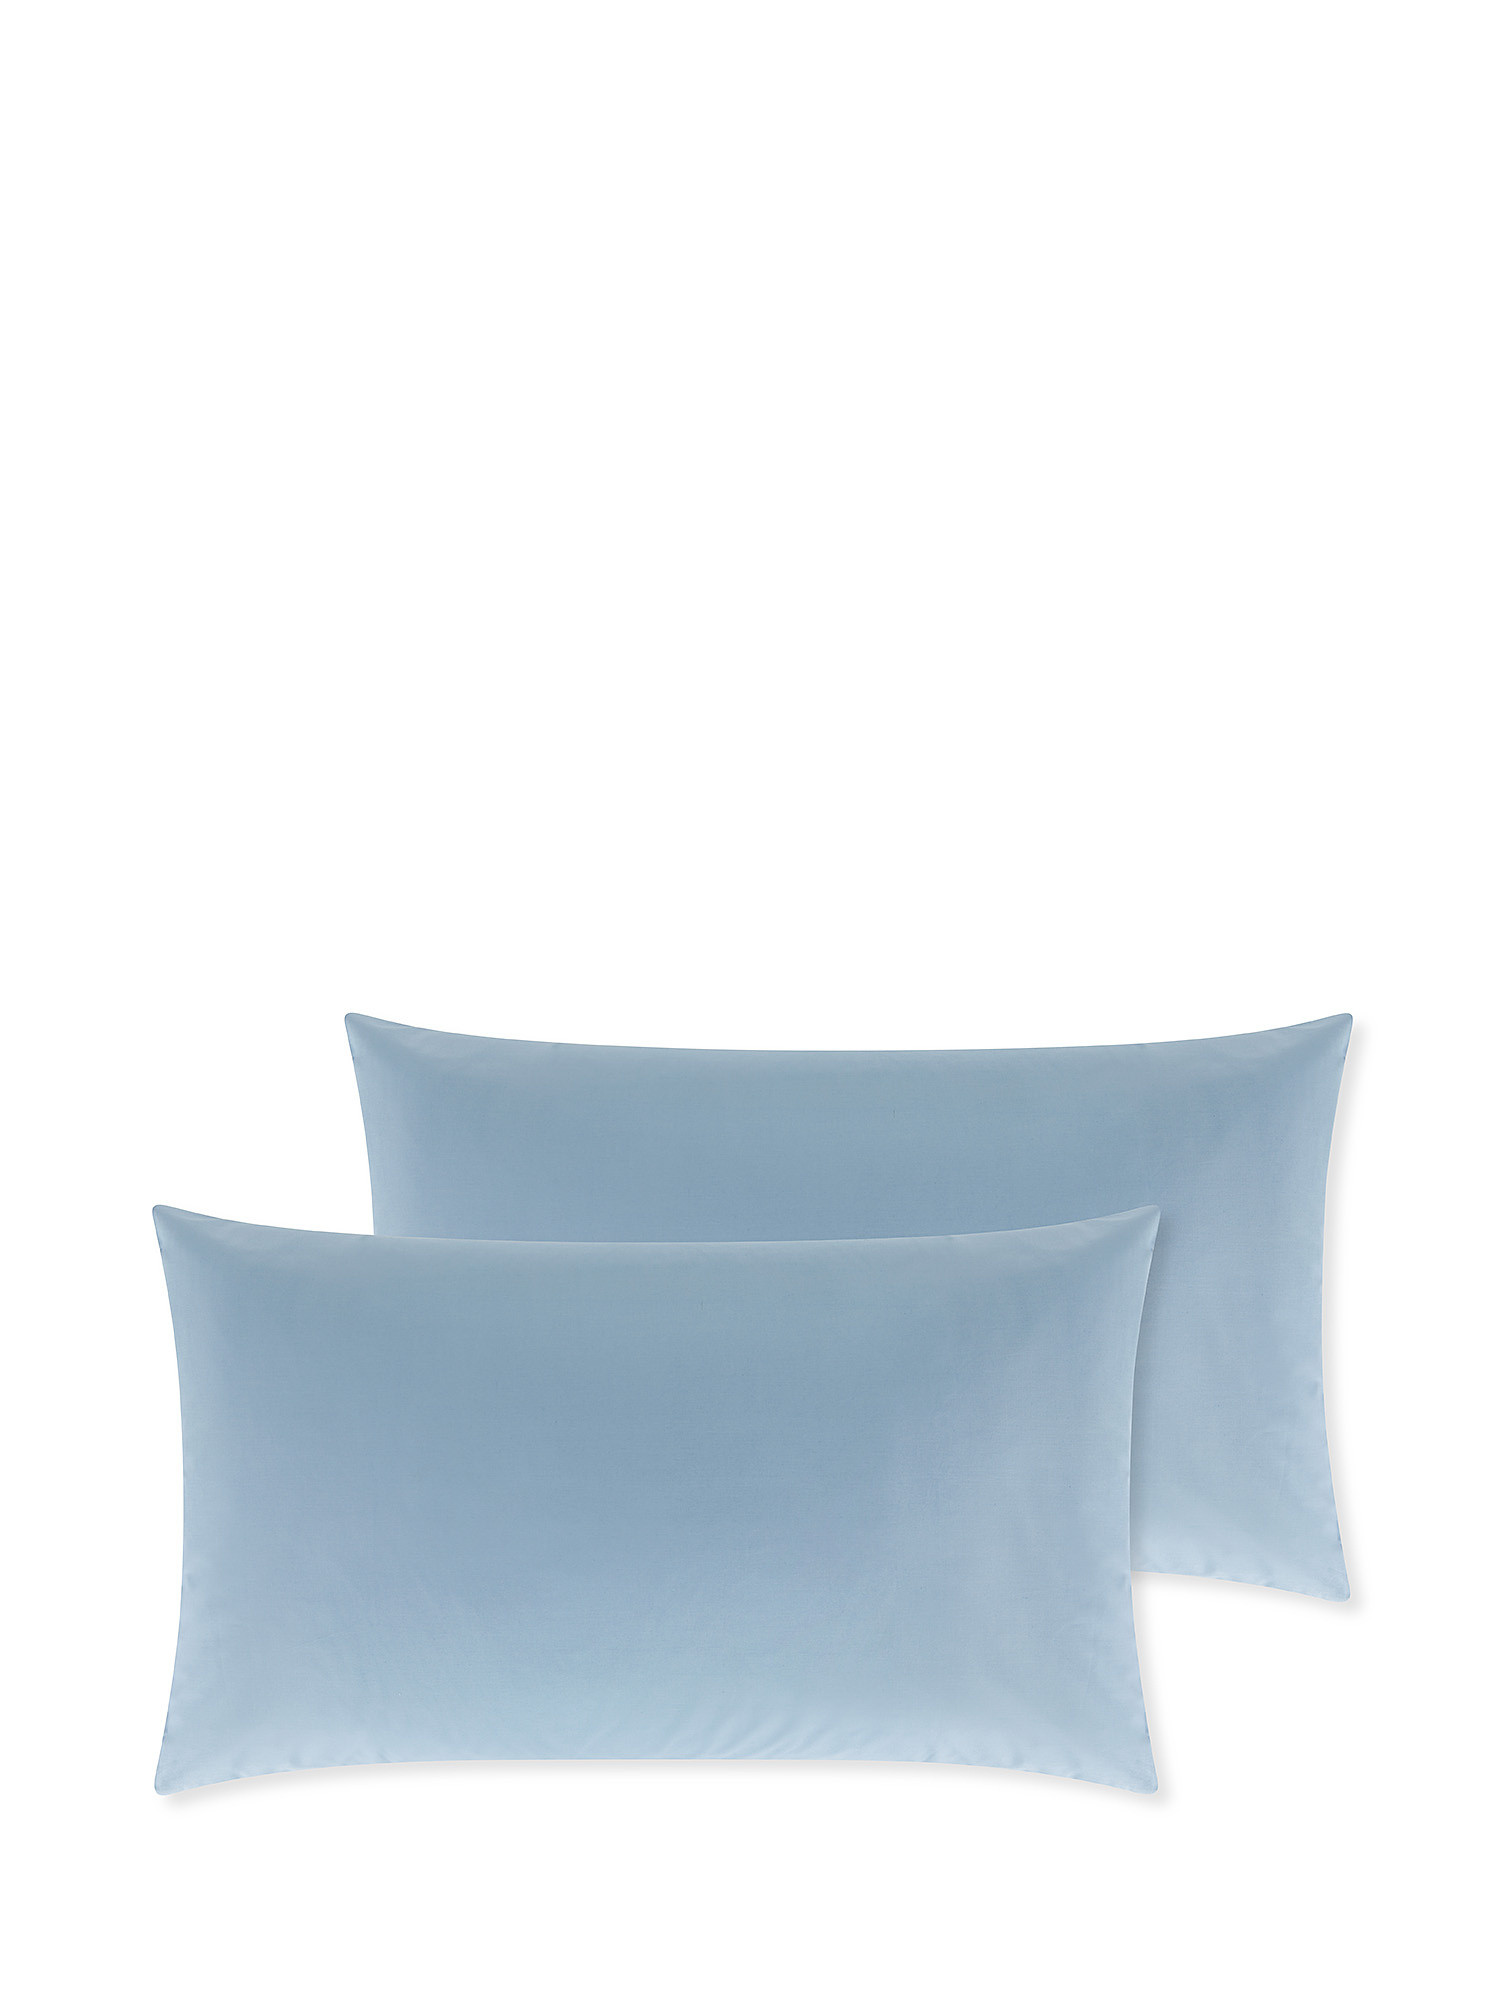 Set of 2 solid color cotton percale pillowcases, Light Blue, large image number 0